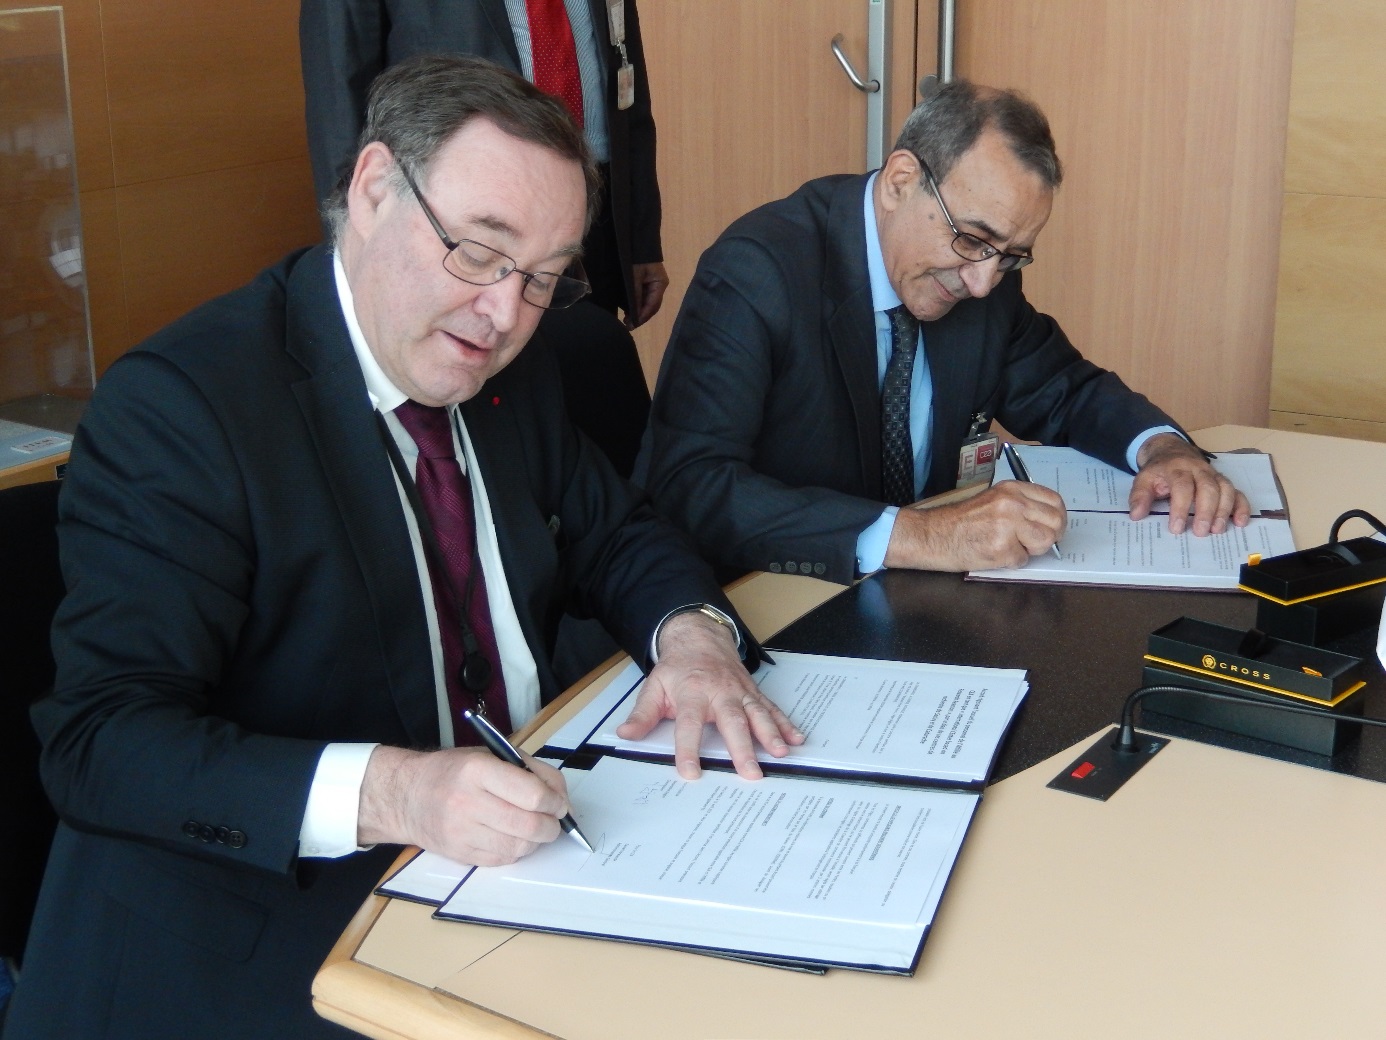 The CEA and Algeria's COMENA sign a nuclear research agreement